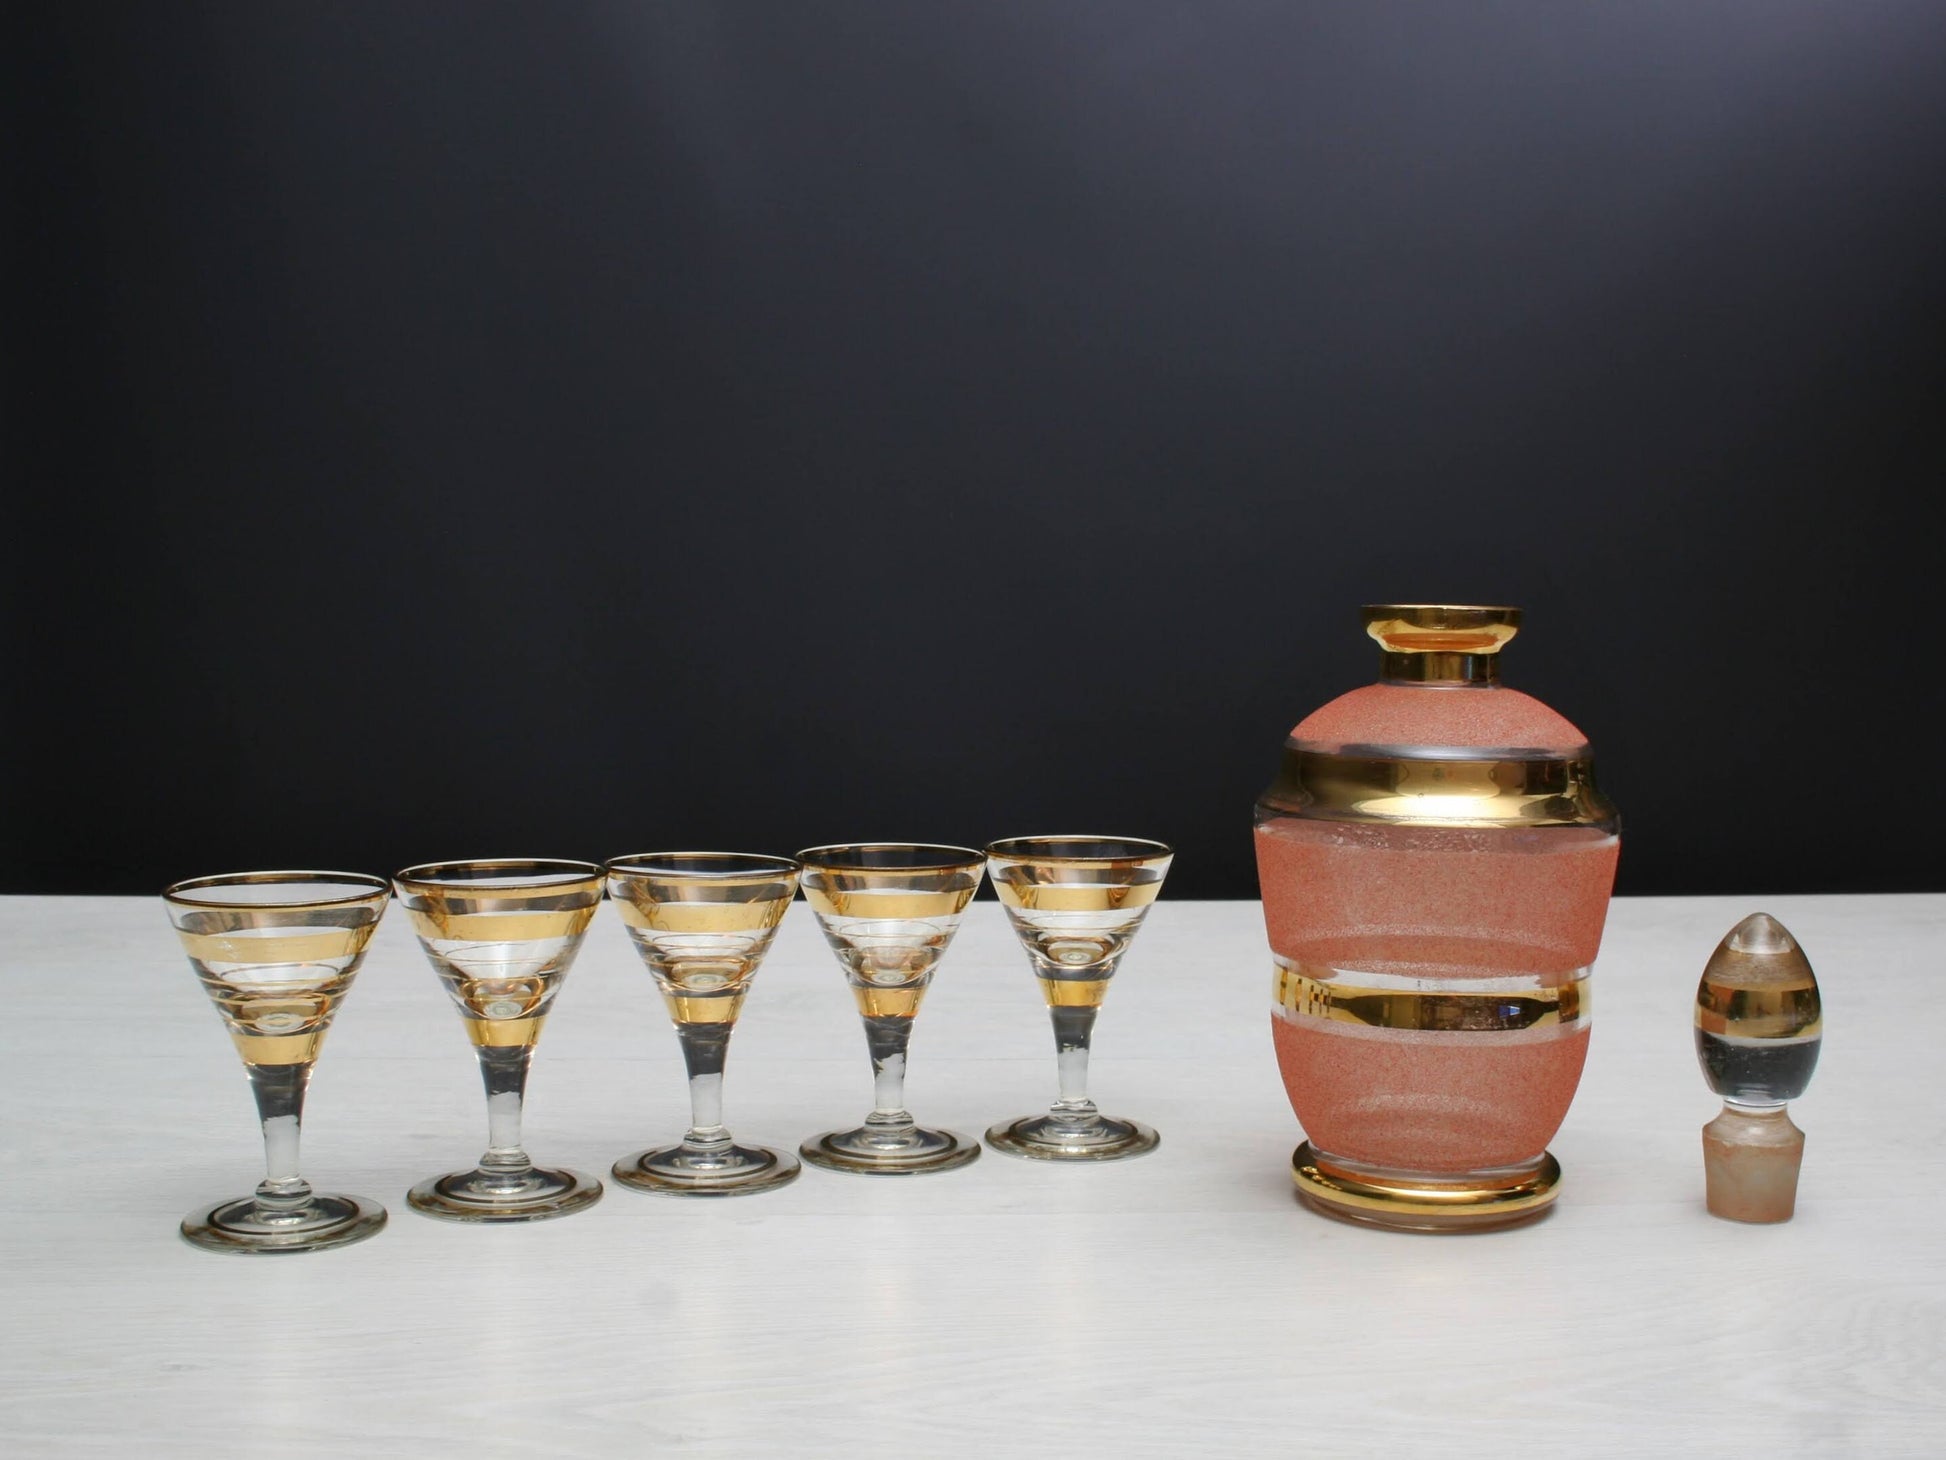 Vintage Decanter Set | Whiskey Decanter Deals, Gifts for Men and Gifts For Women